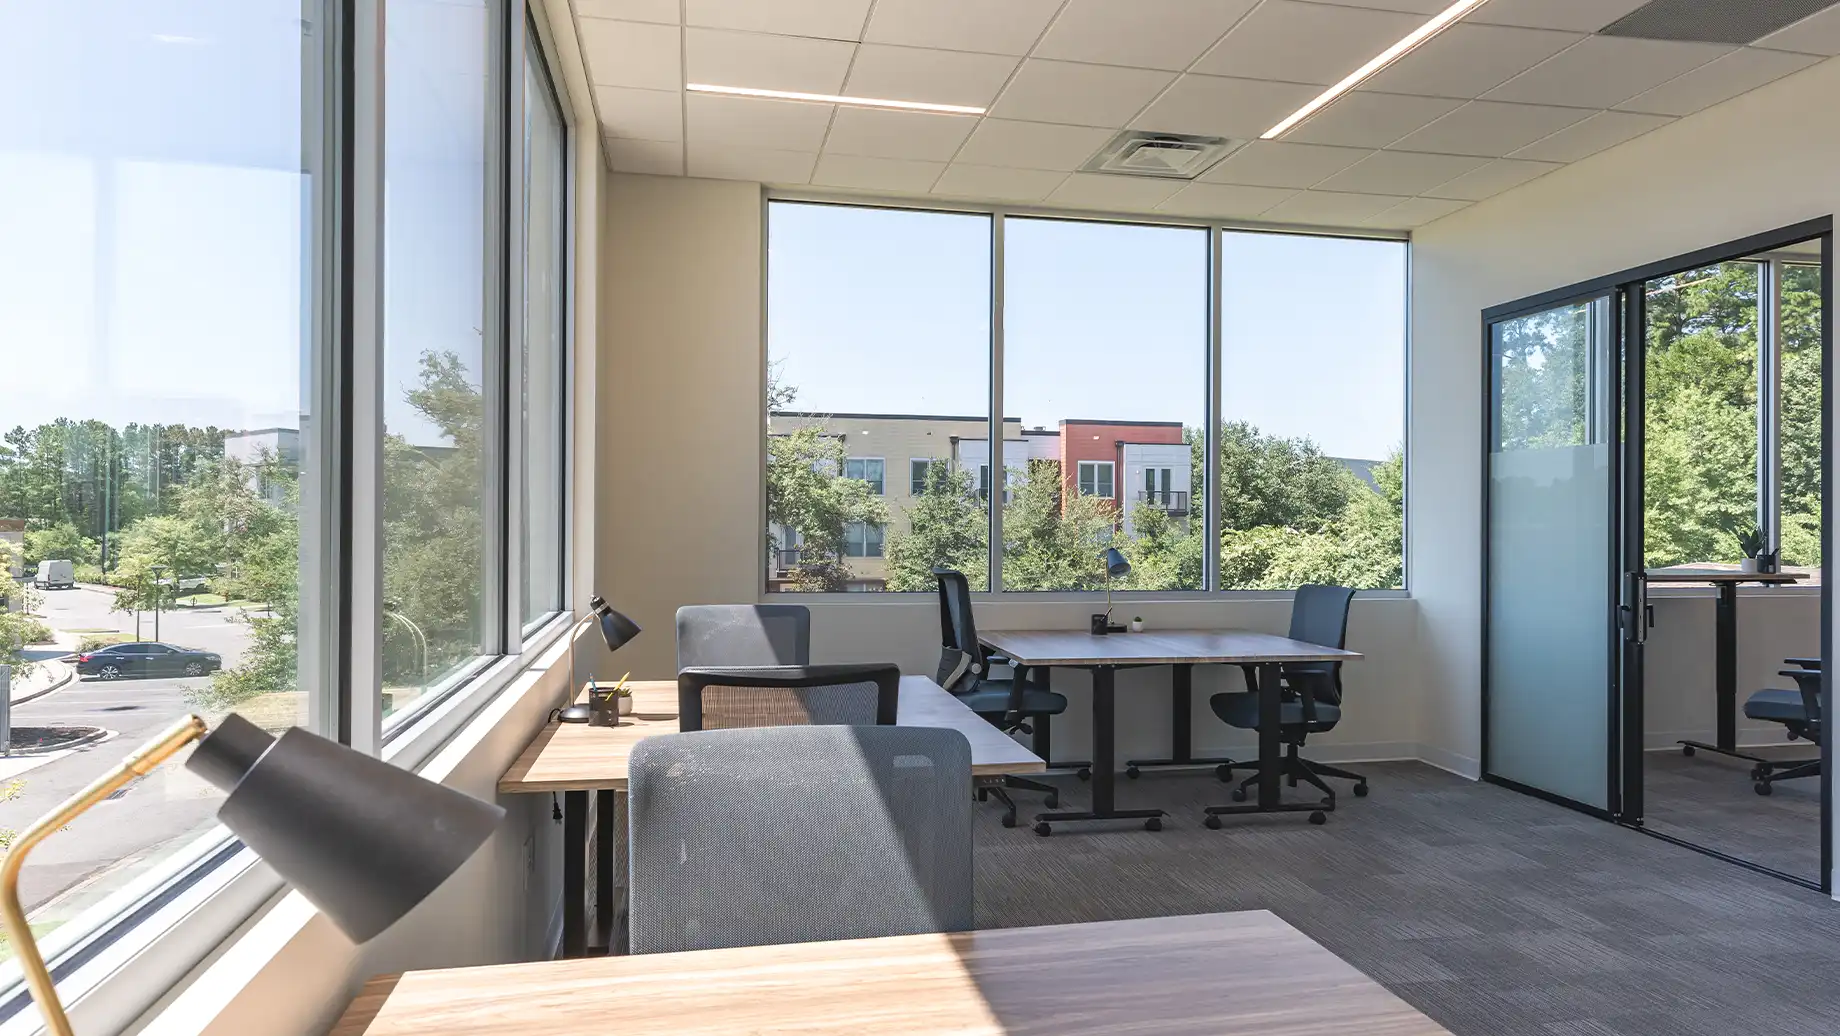 Private Team Room with outdoor views. East Memphis Private Office & Coworking Space